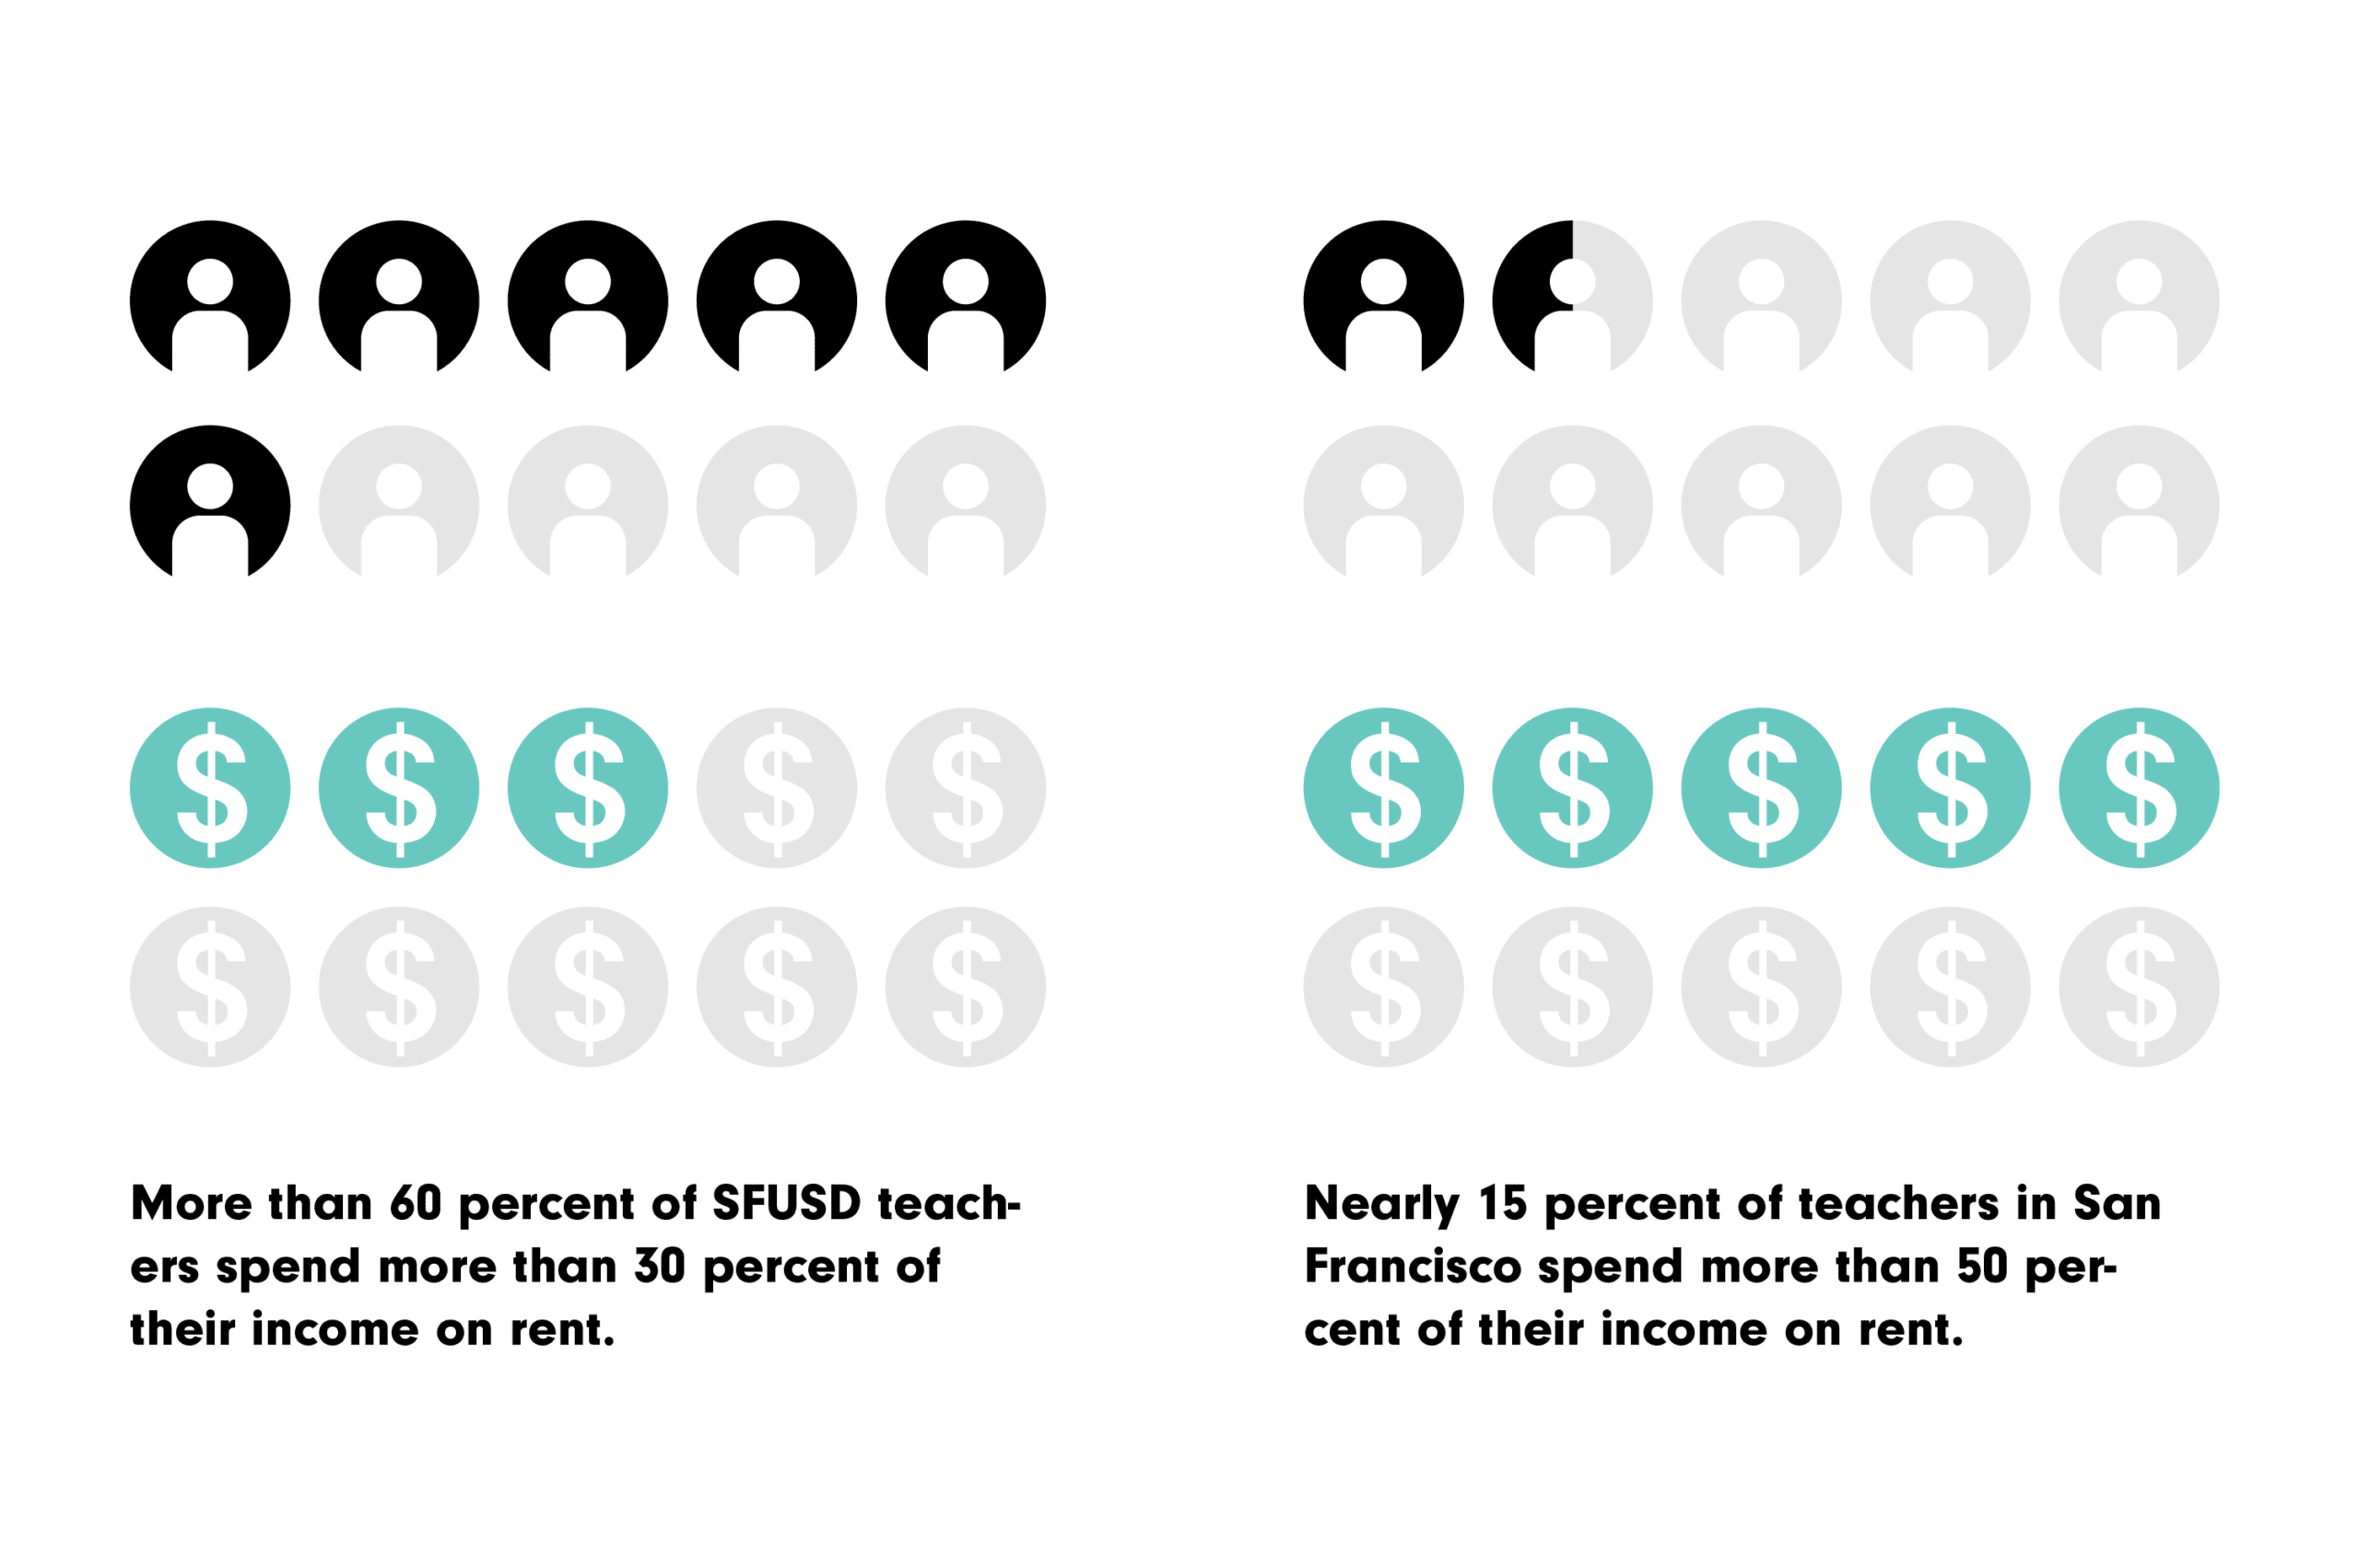 Diagram showing income of San Francisco teachers versus the average amount spent on rent.